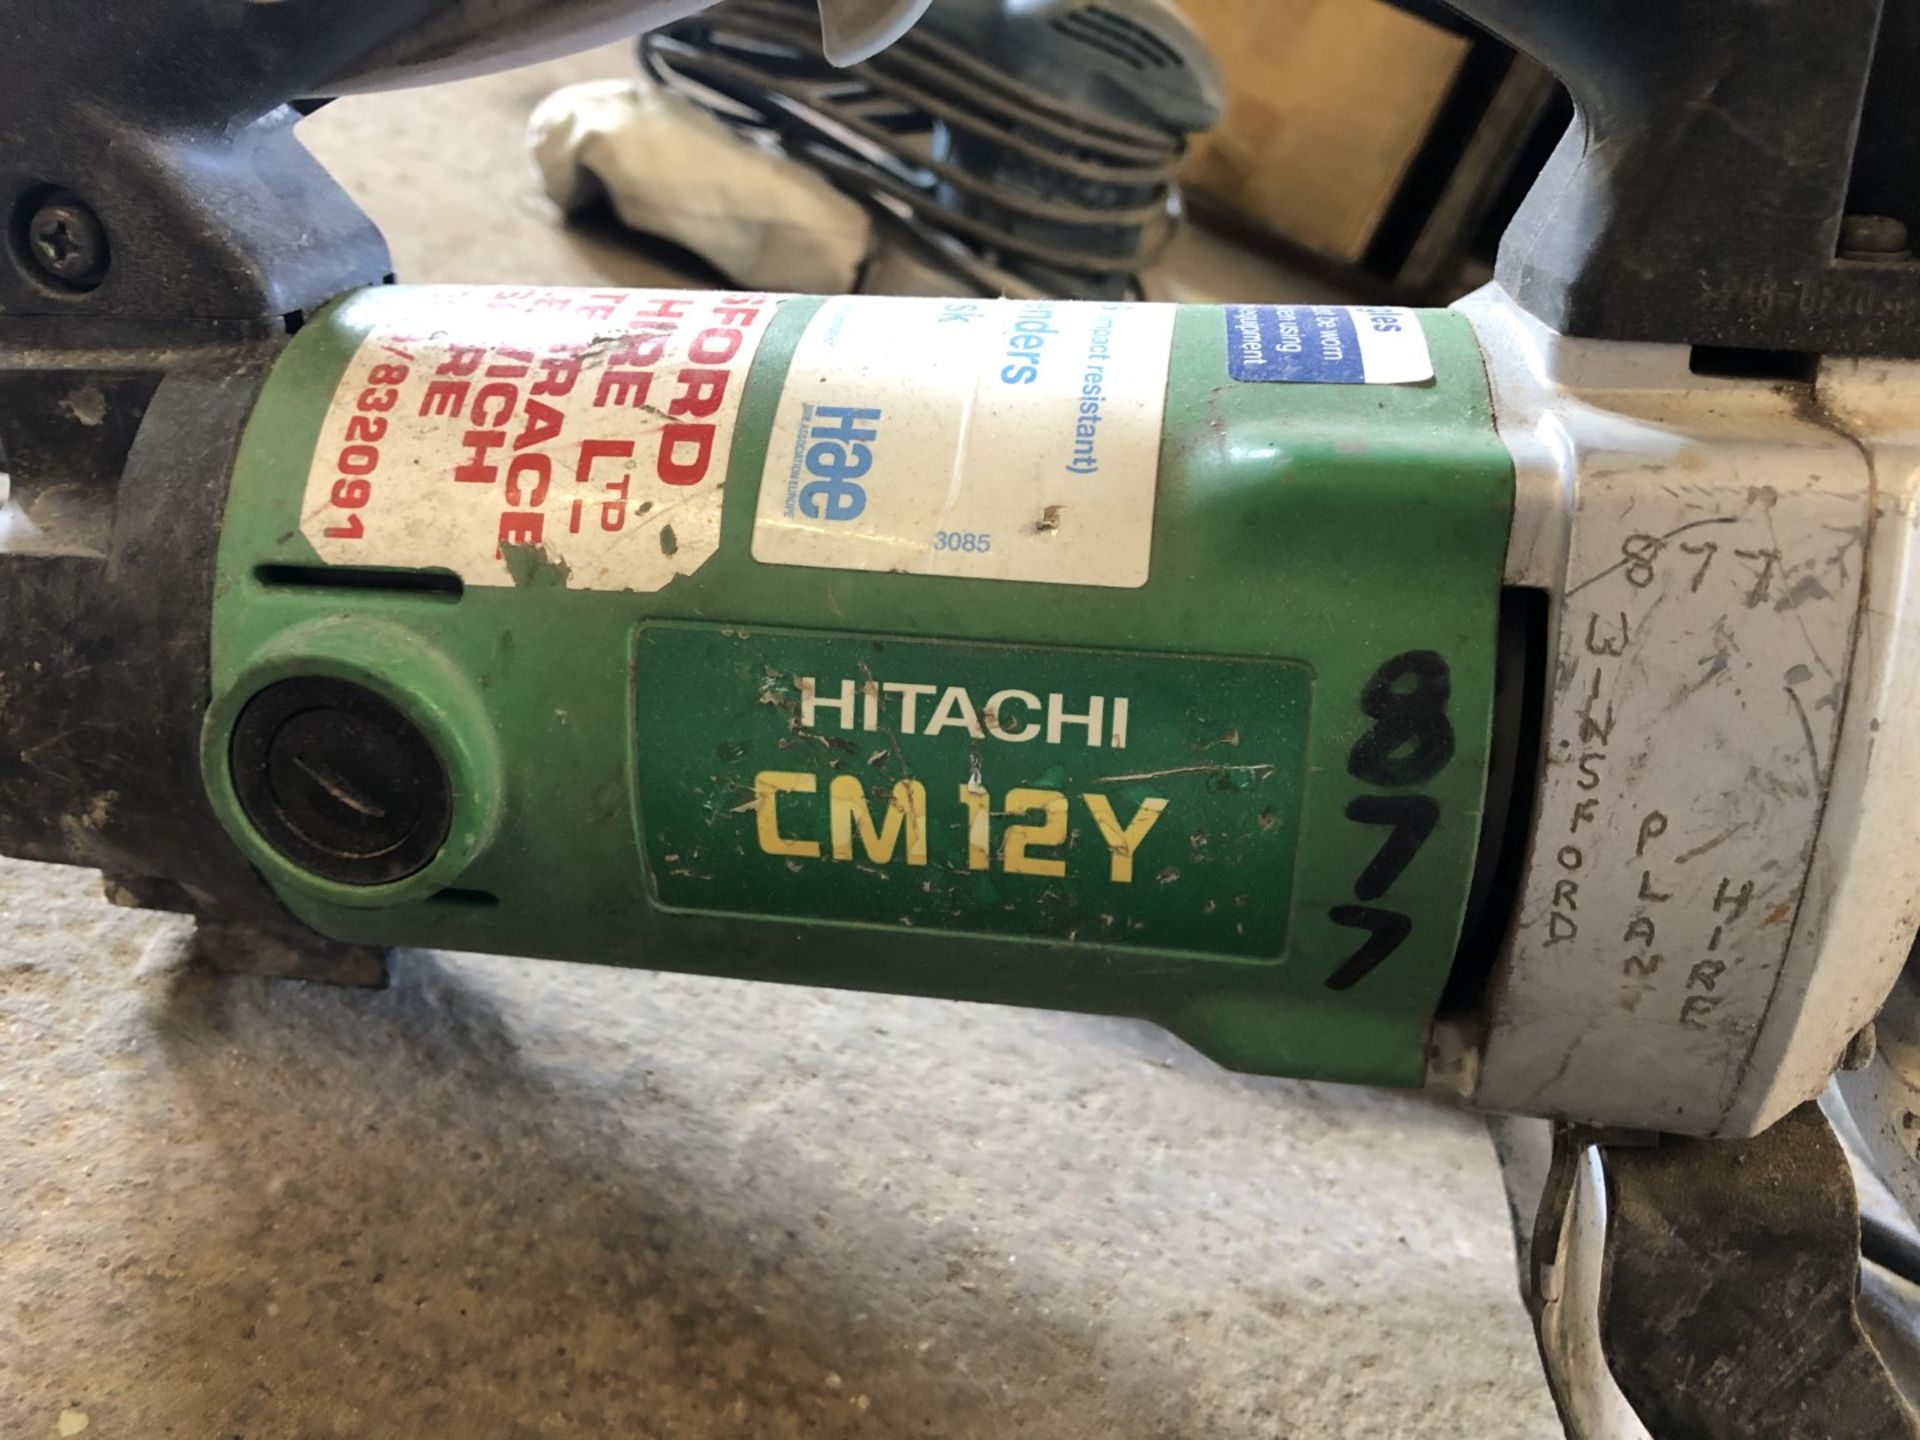 Hitachi CM 12Y cut-off saw / power disc cutter, 110v - NOT TESTED - Image 2 of 3